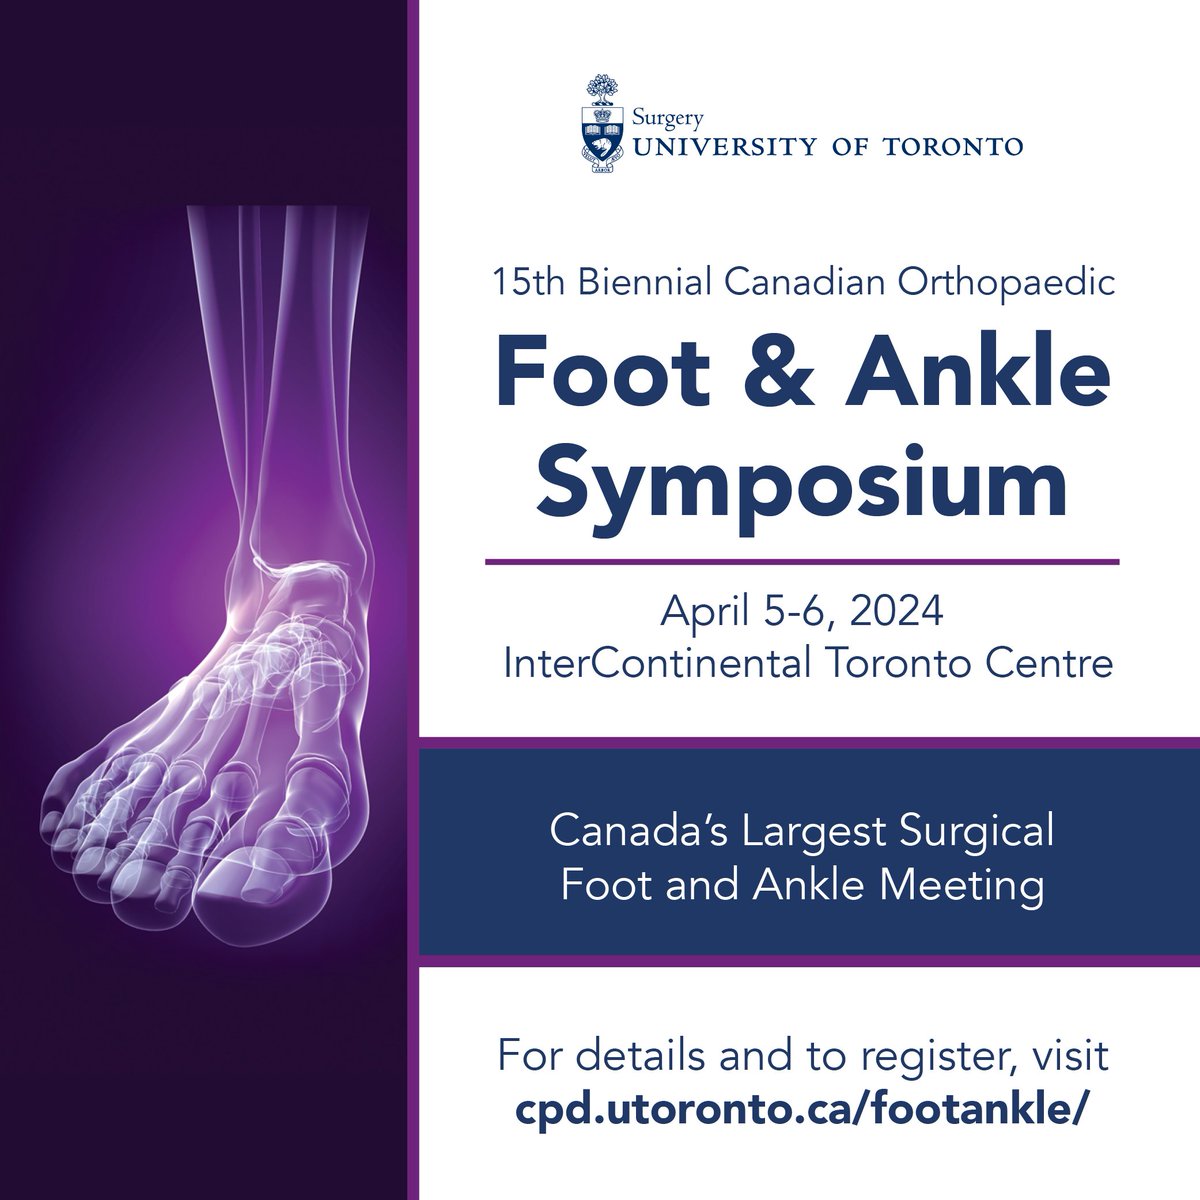 UPCOMING: U of T’s 15th Biennial Foot & Ankle Symposium 🗓️April 5-6, 2024 🏢InterContinental Toronto Centre 🇨🇦 ➡️Register at cpd.utoronto.ca/footankle Canada's largest surgical foot & ankle meeting providing a forum & hub for practising Orthopaedic surgeons to stay current & meet.